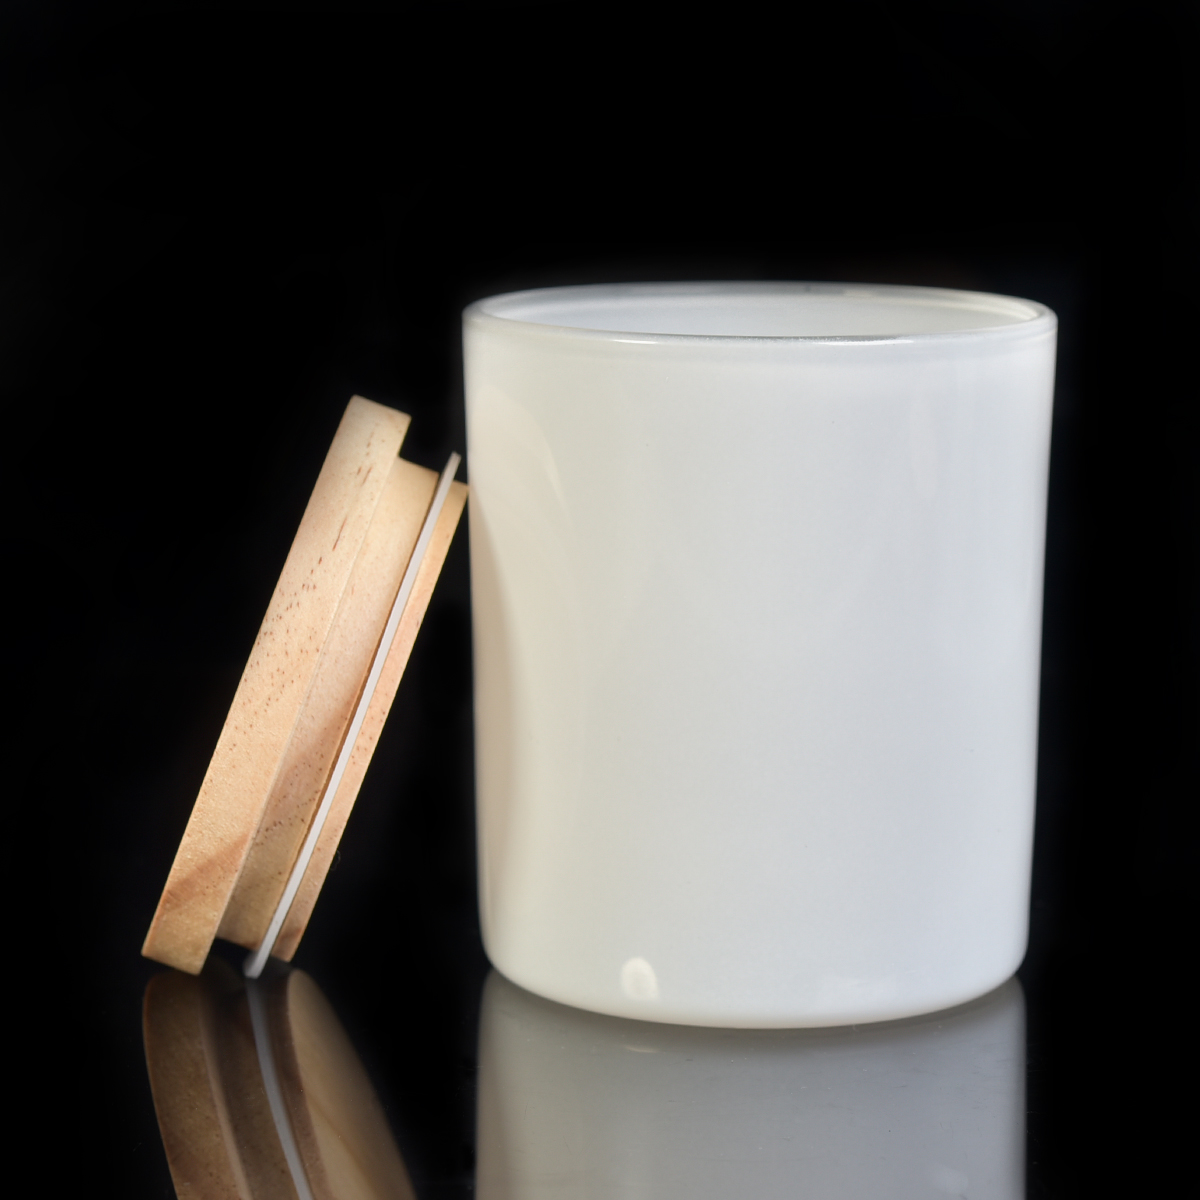 10oz White Glass Candle Jar With Wooden Lids